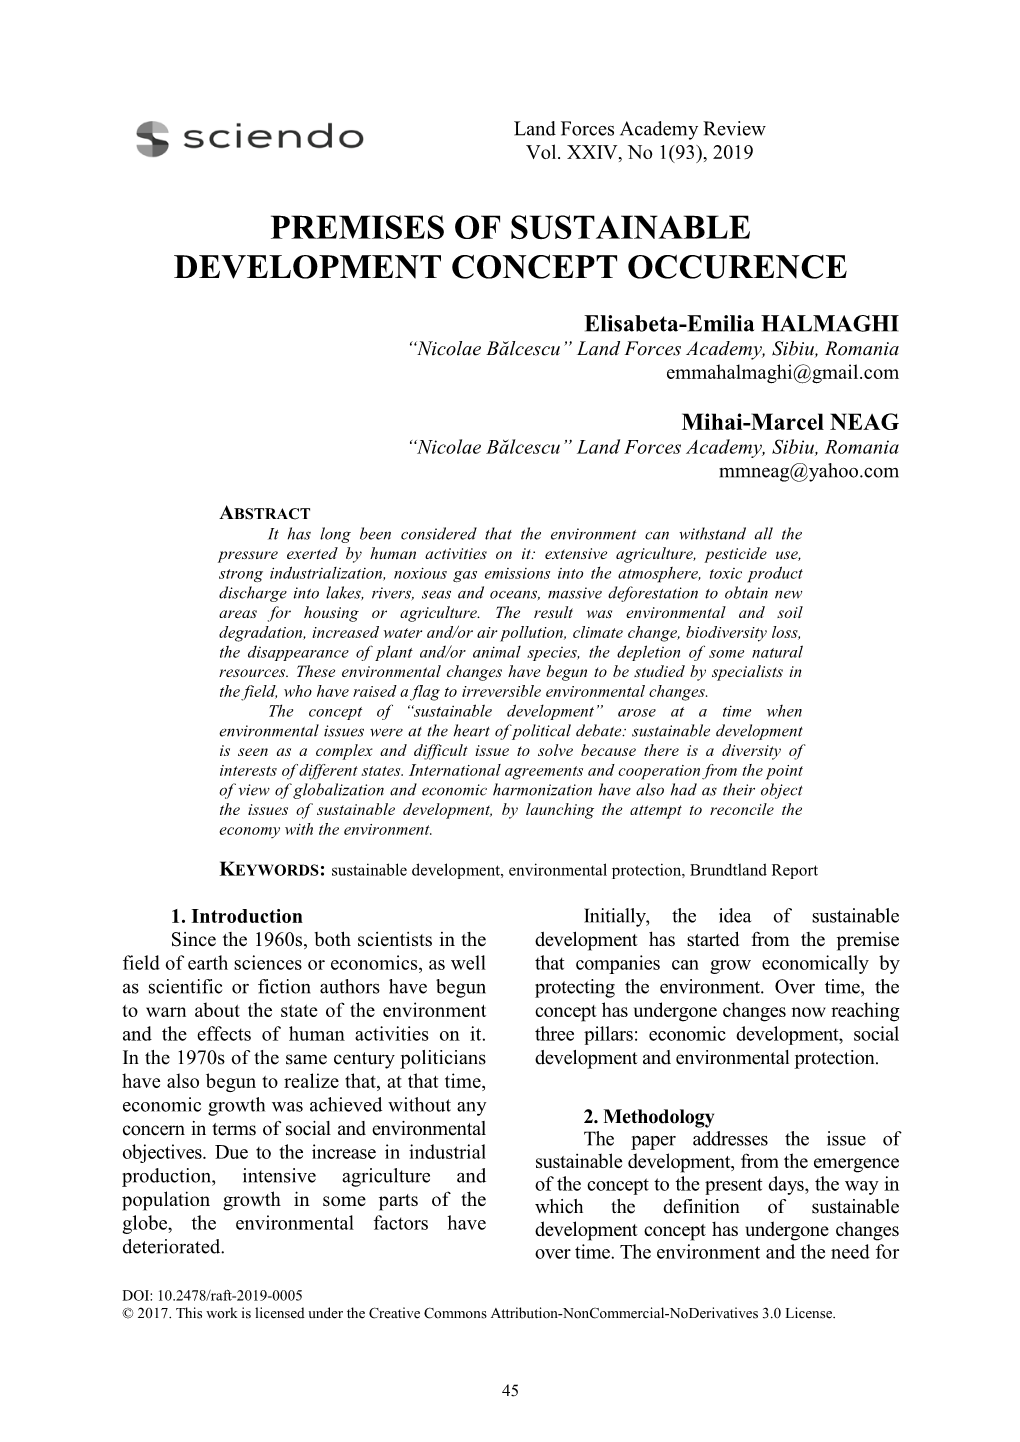 Premises of Sustainable Development Concept Occurence